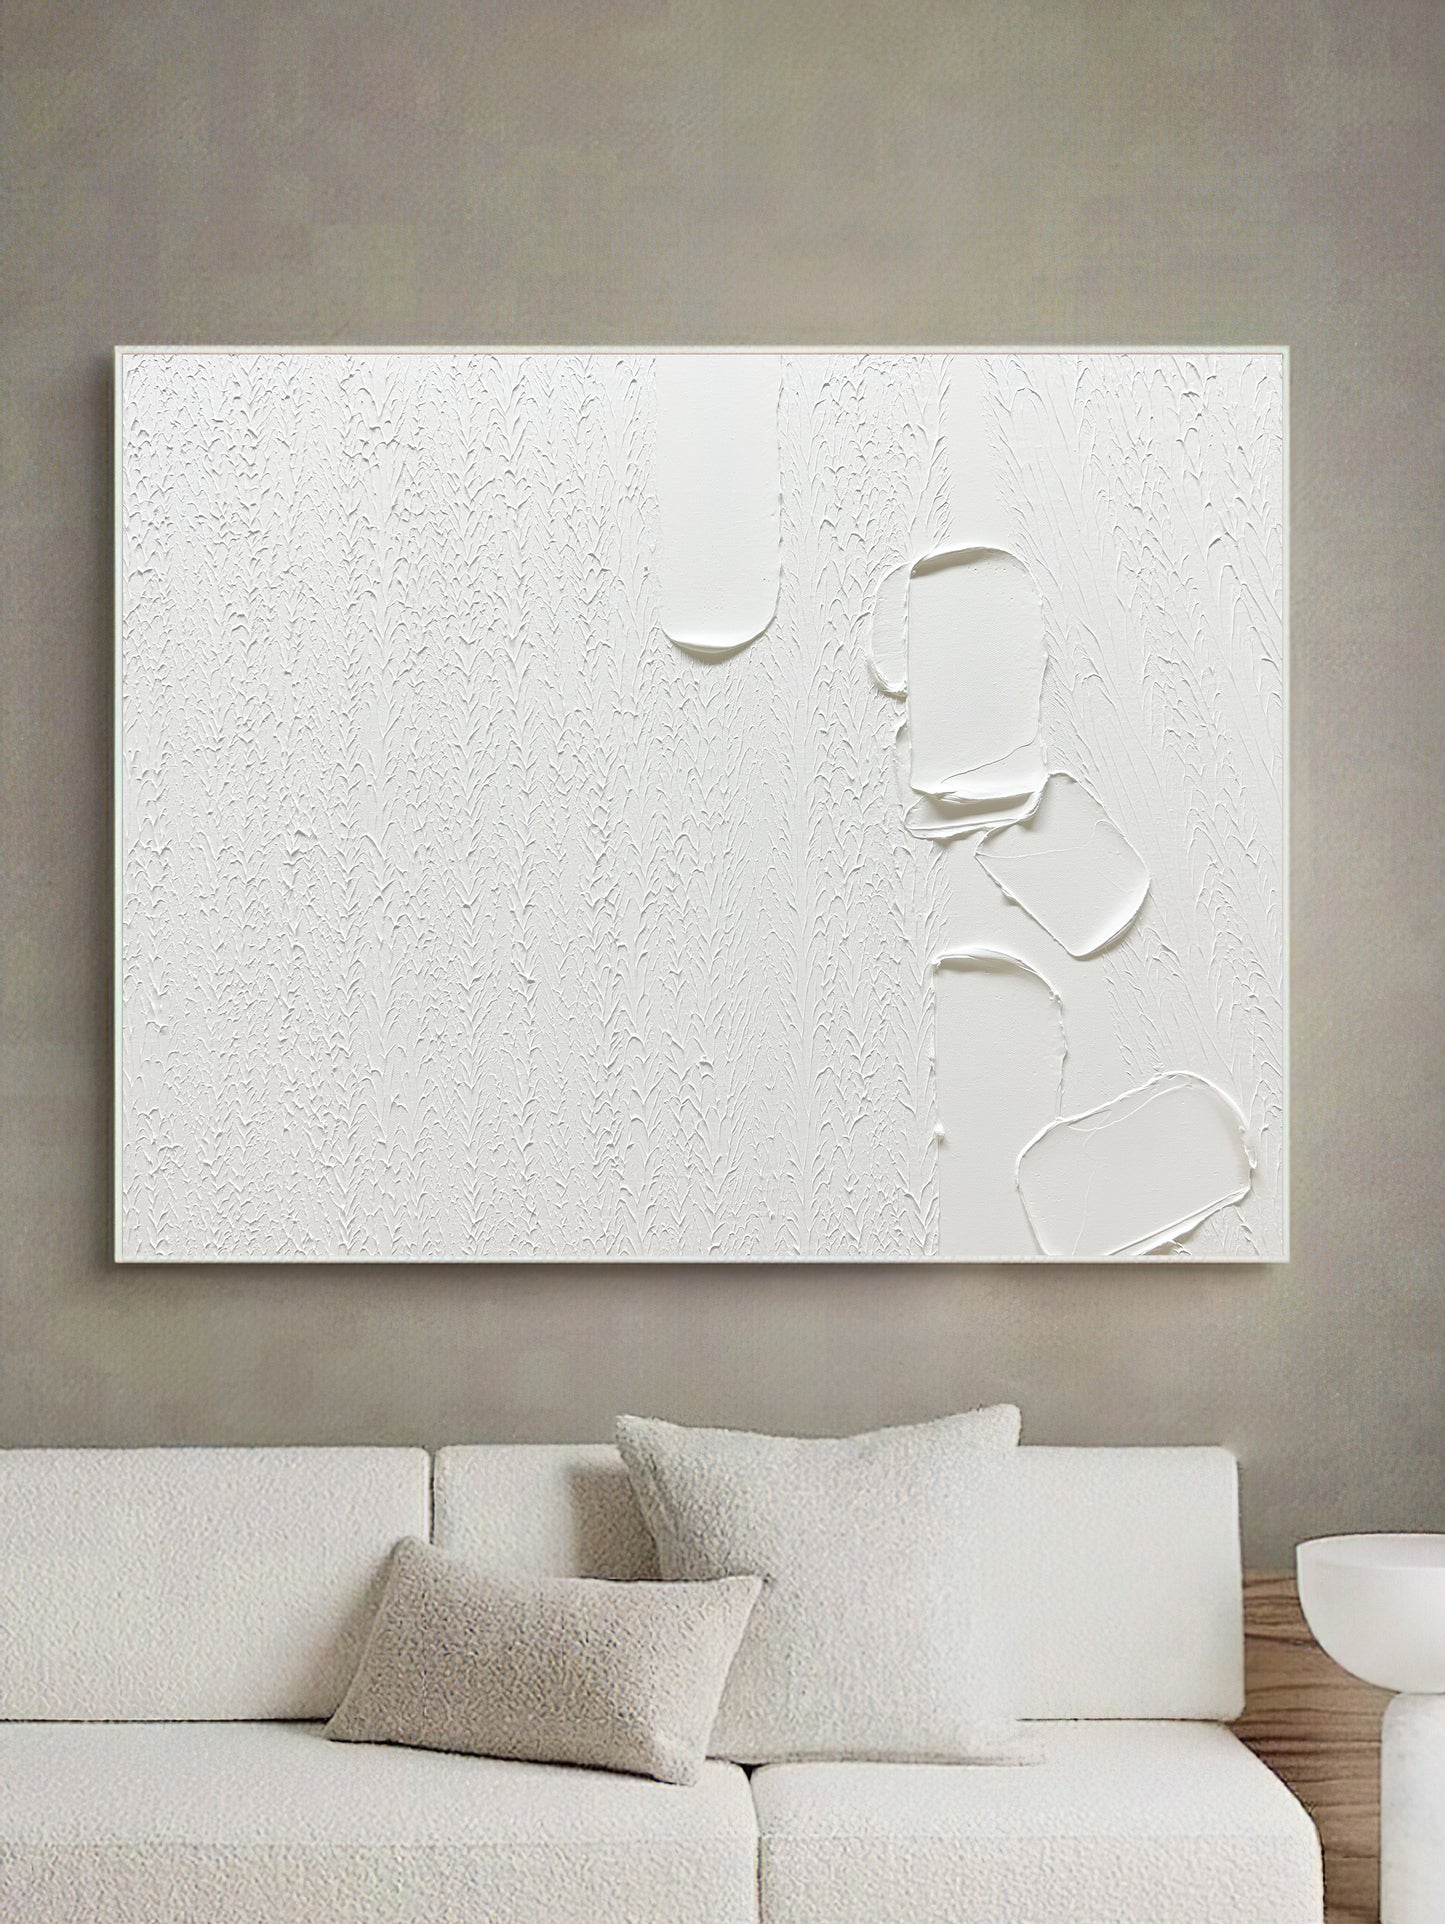 Large White Textured Canvas Painting,white Textured Wall Art